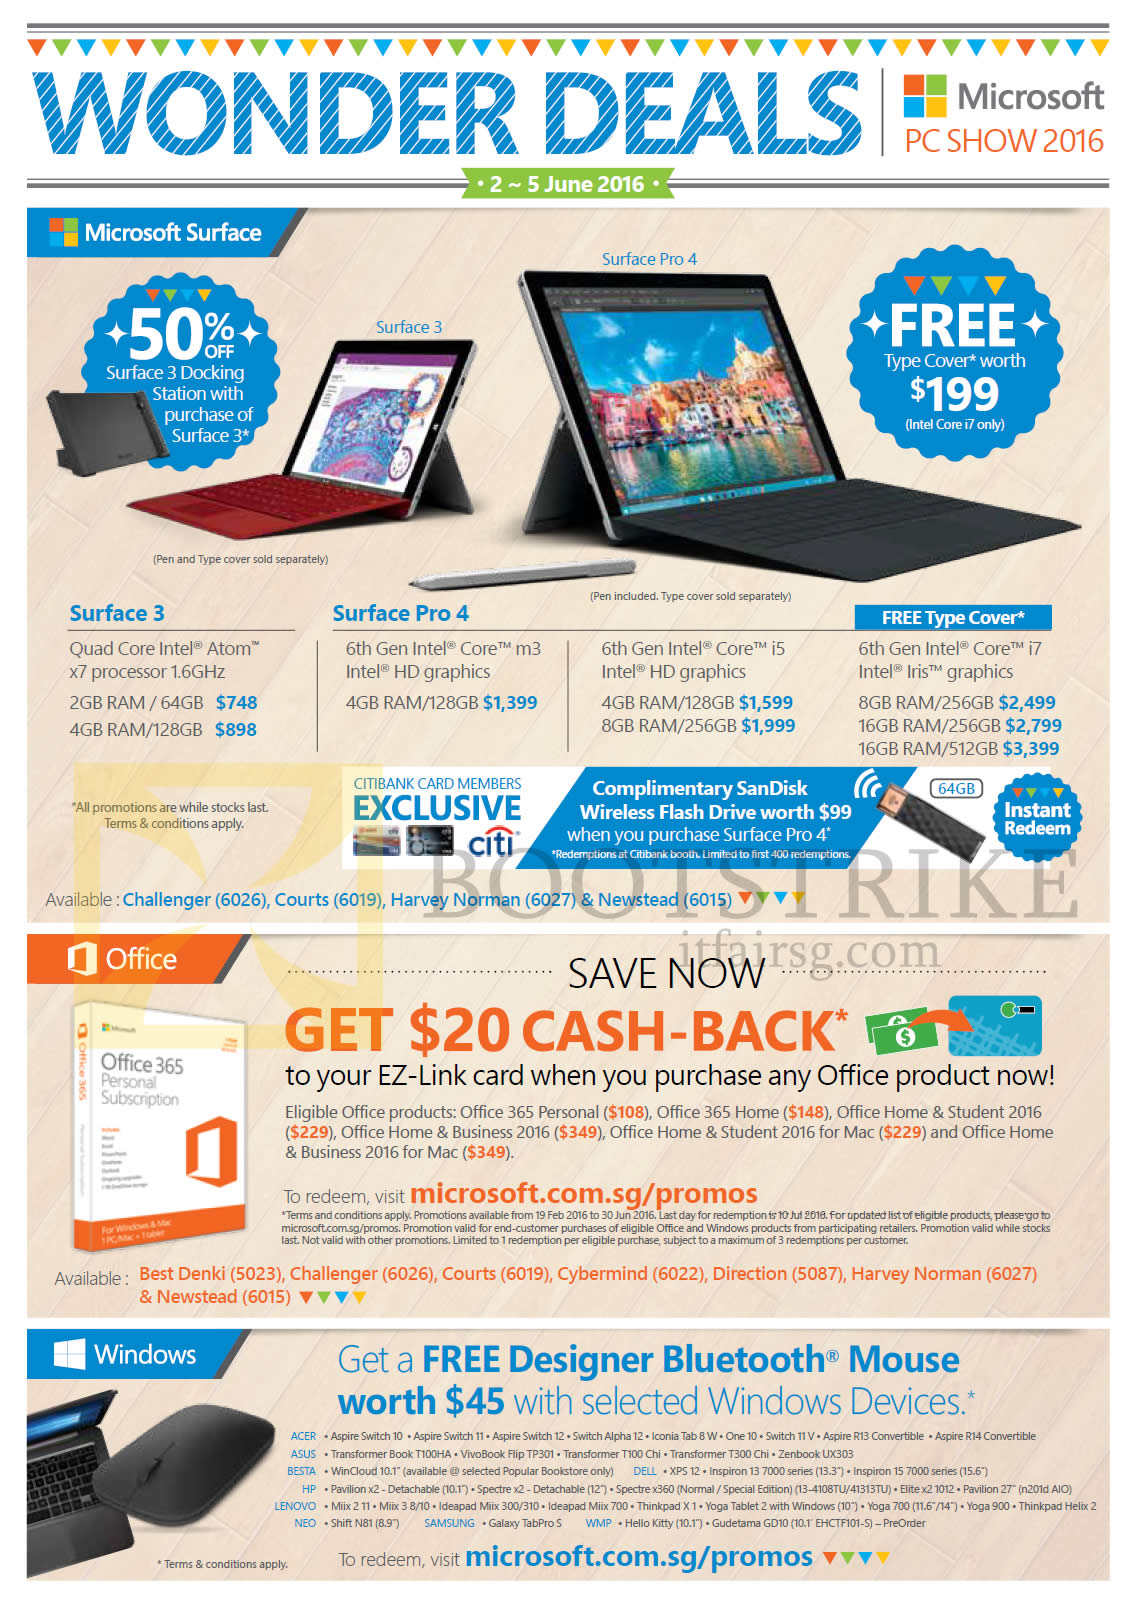 PC SHOW 2016 price list image brochure of Microsoft Tablets Surface 3, Pro 4, Office 365, Free Bluetooth Mouse